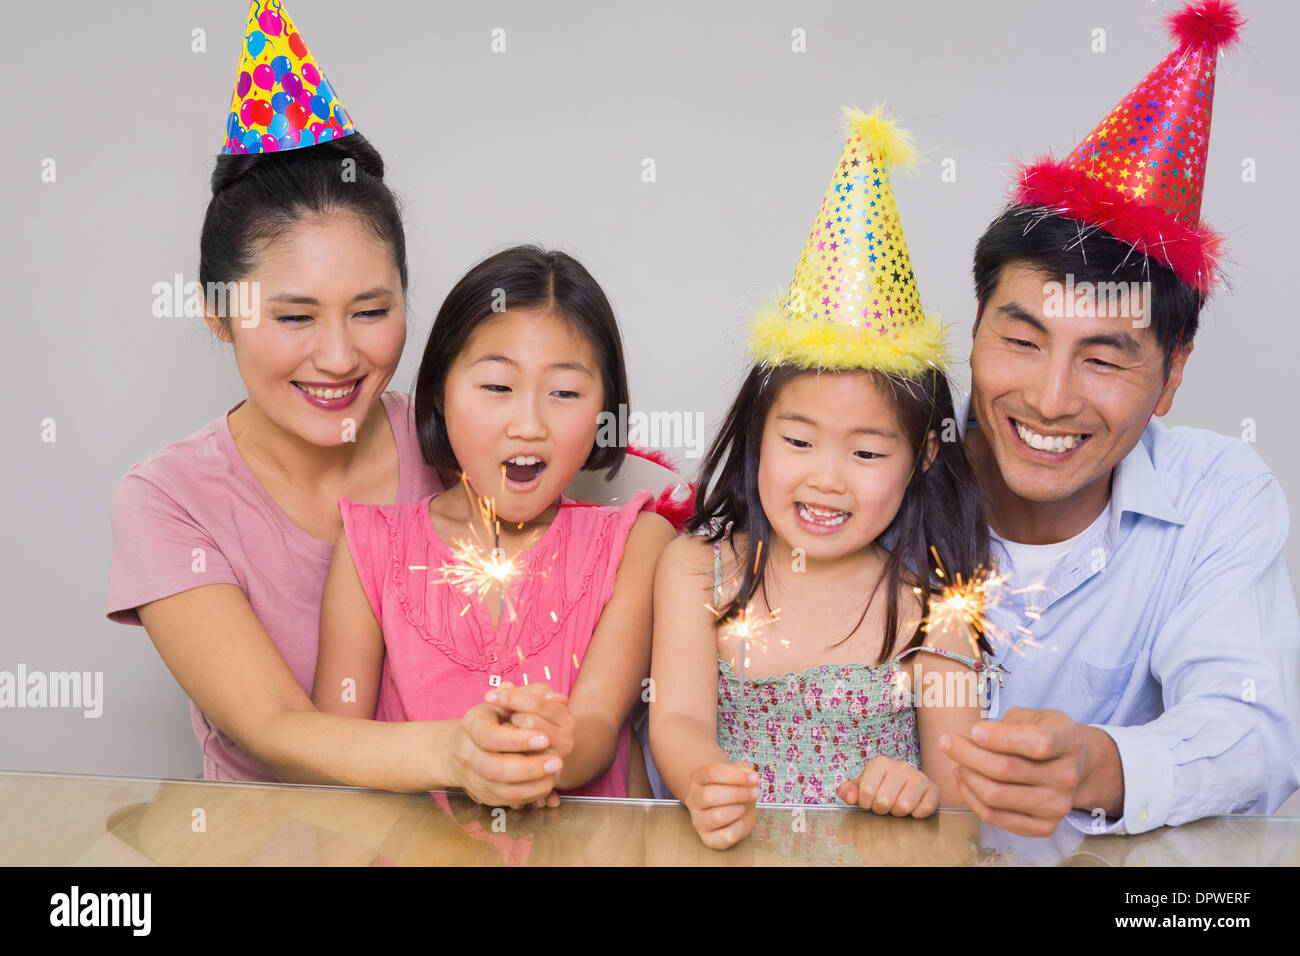 Cheerful family of four playing with firecrackers Stock Photo